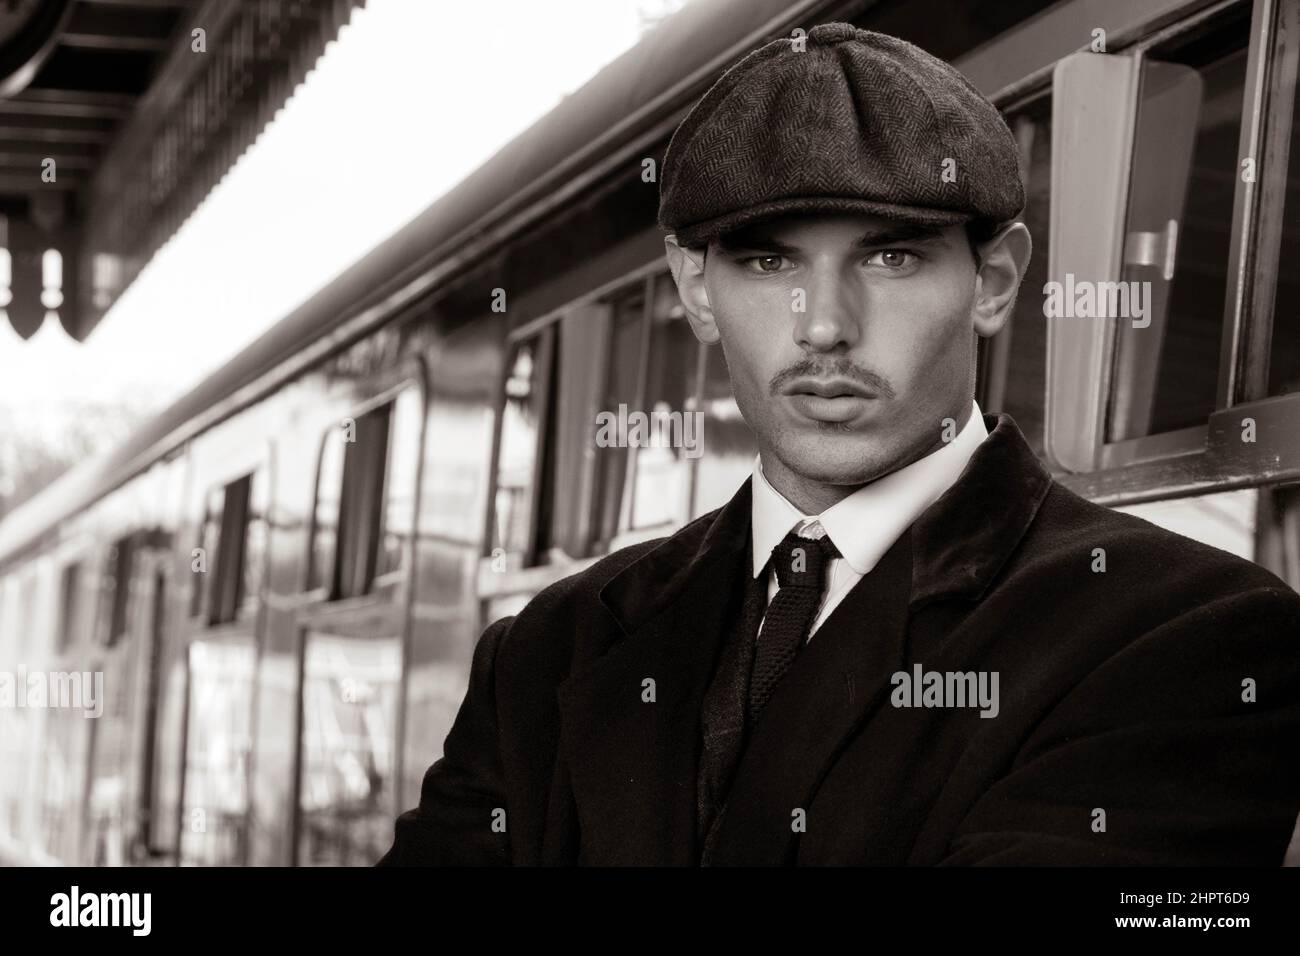 Attractive English gangster with cigarette leaving train at railway station Stock Photo